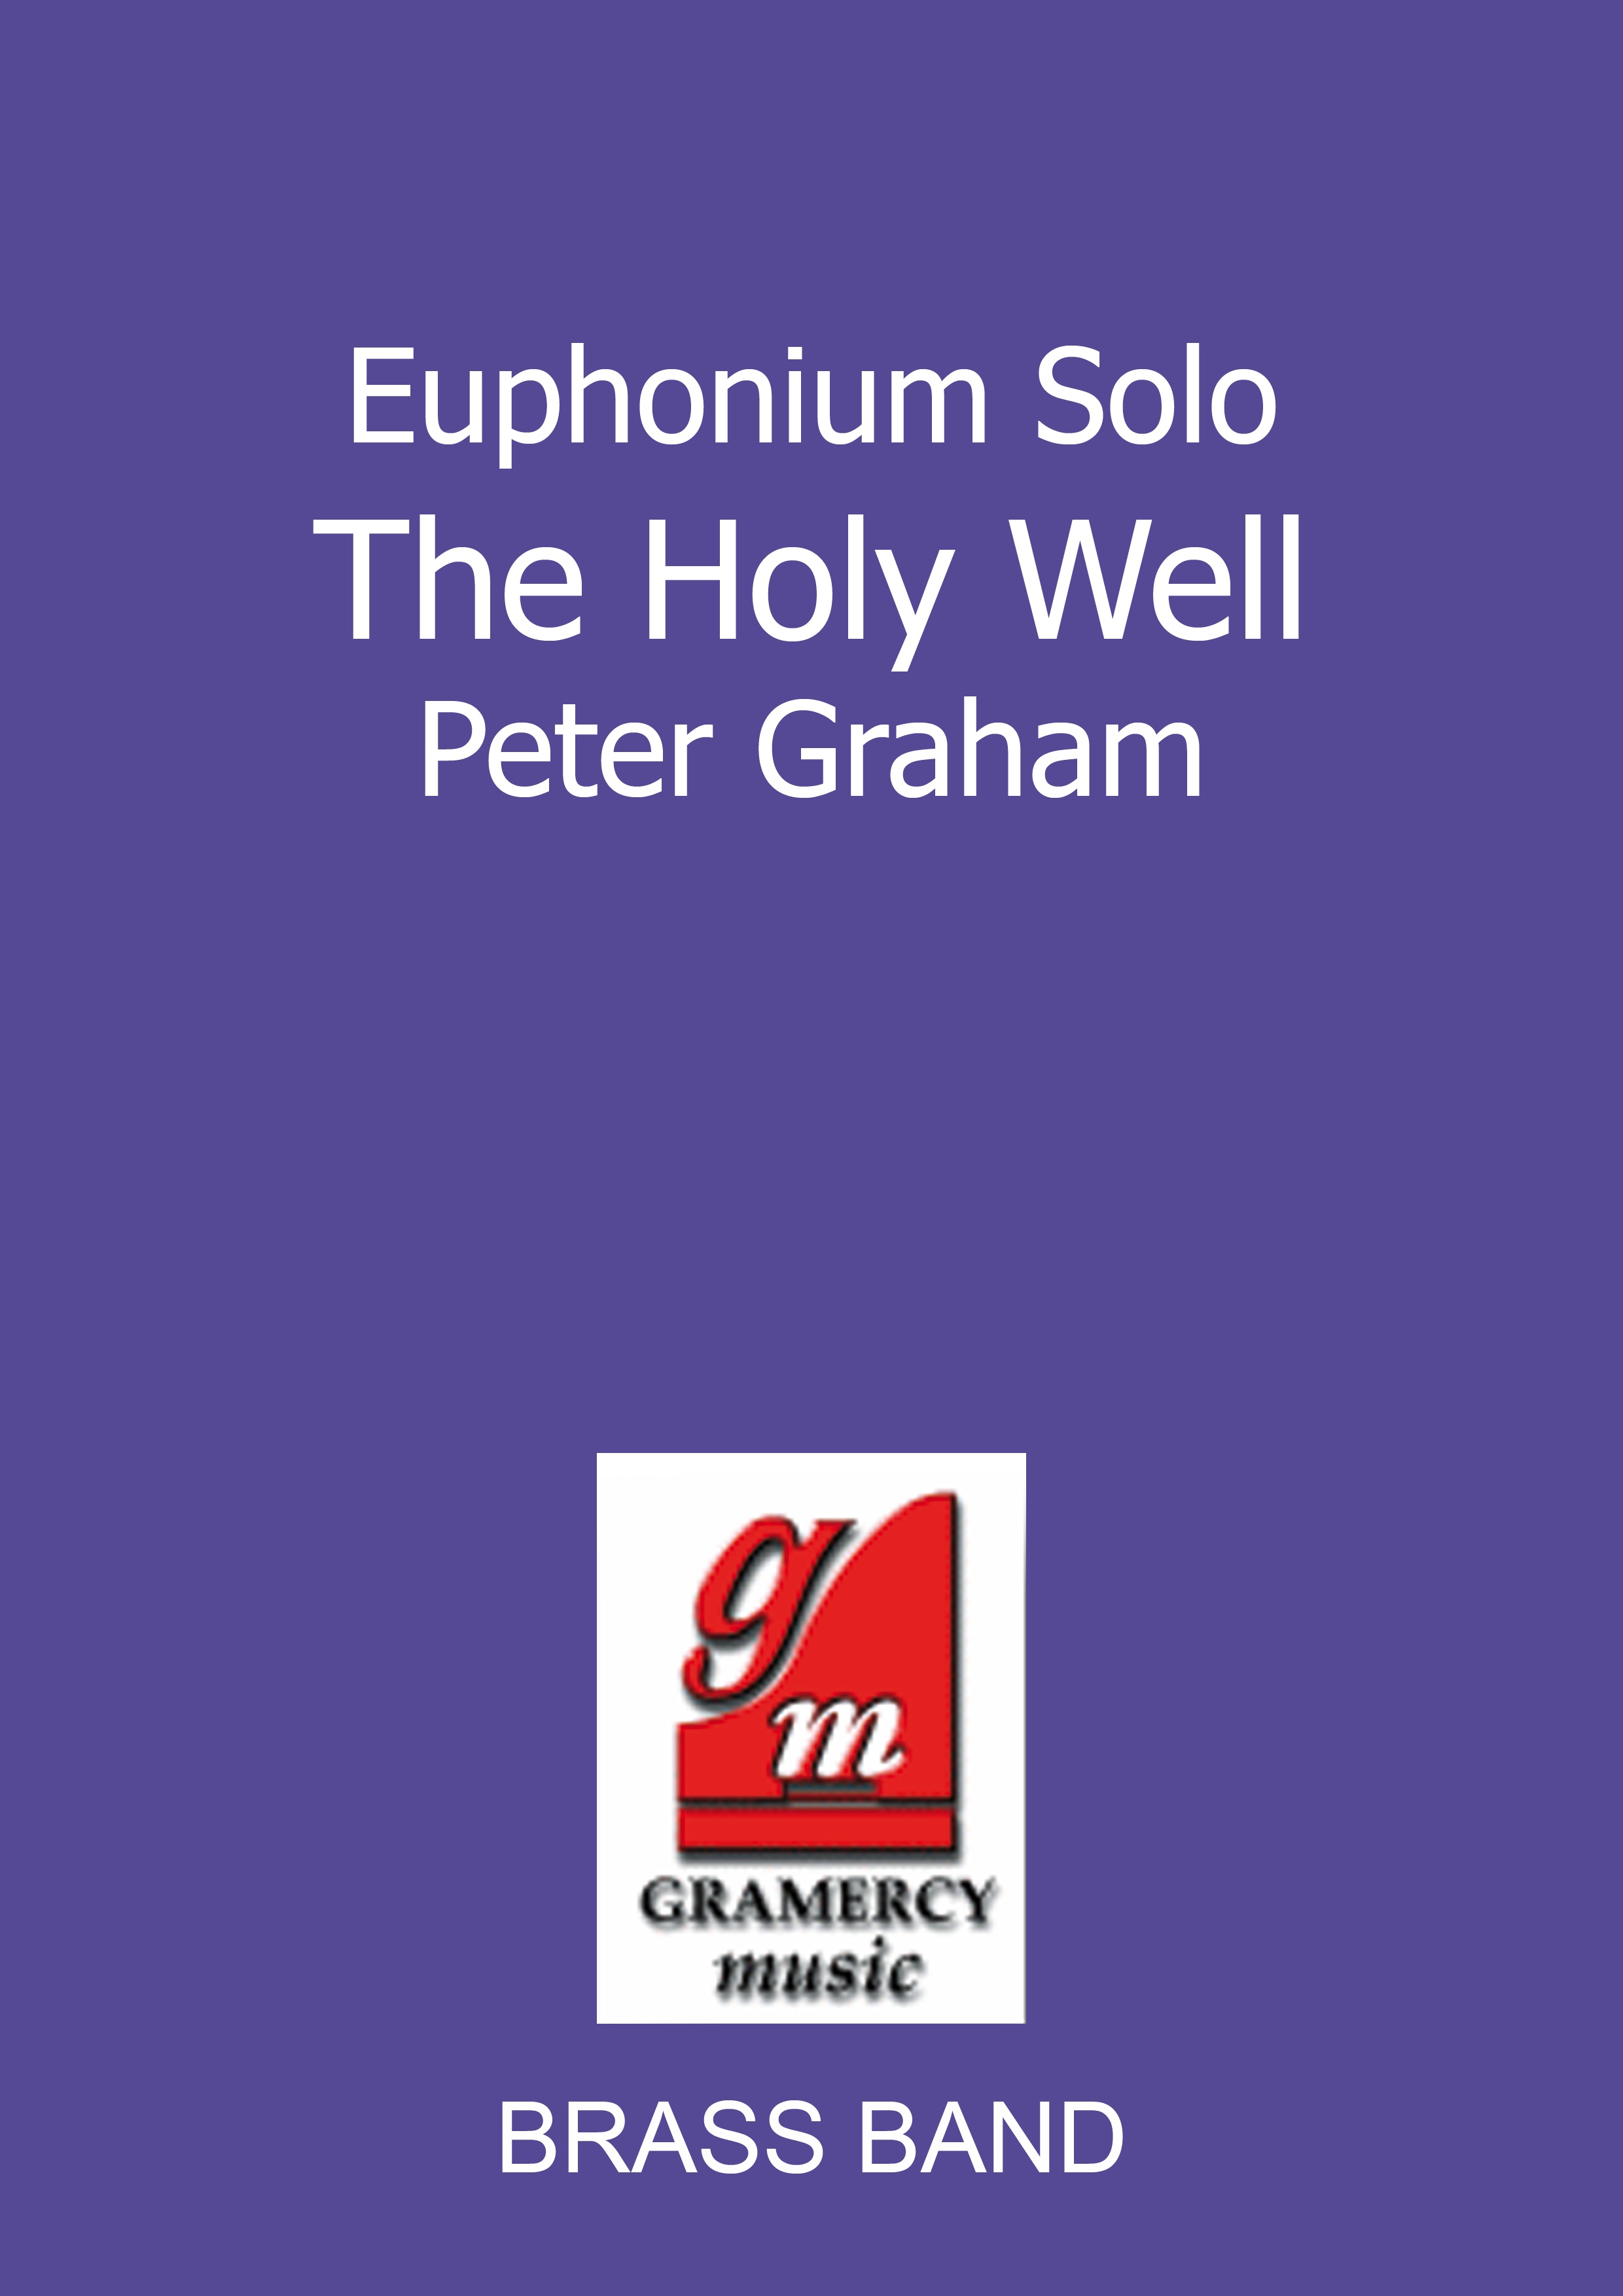 The Holy Well (Euphonium Solo with Brass Band - Score and Parts)